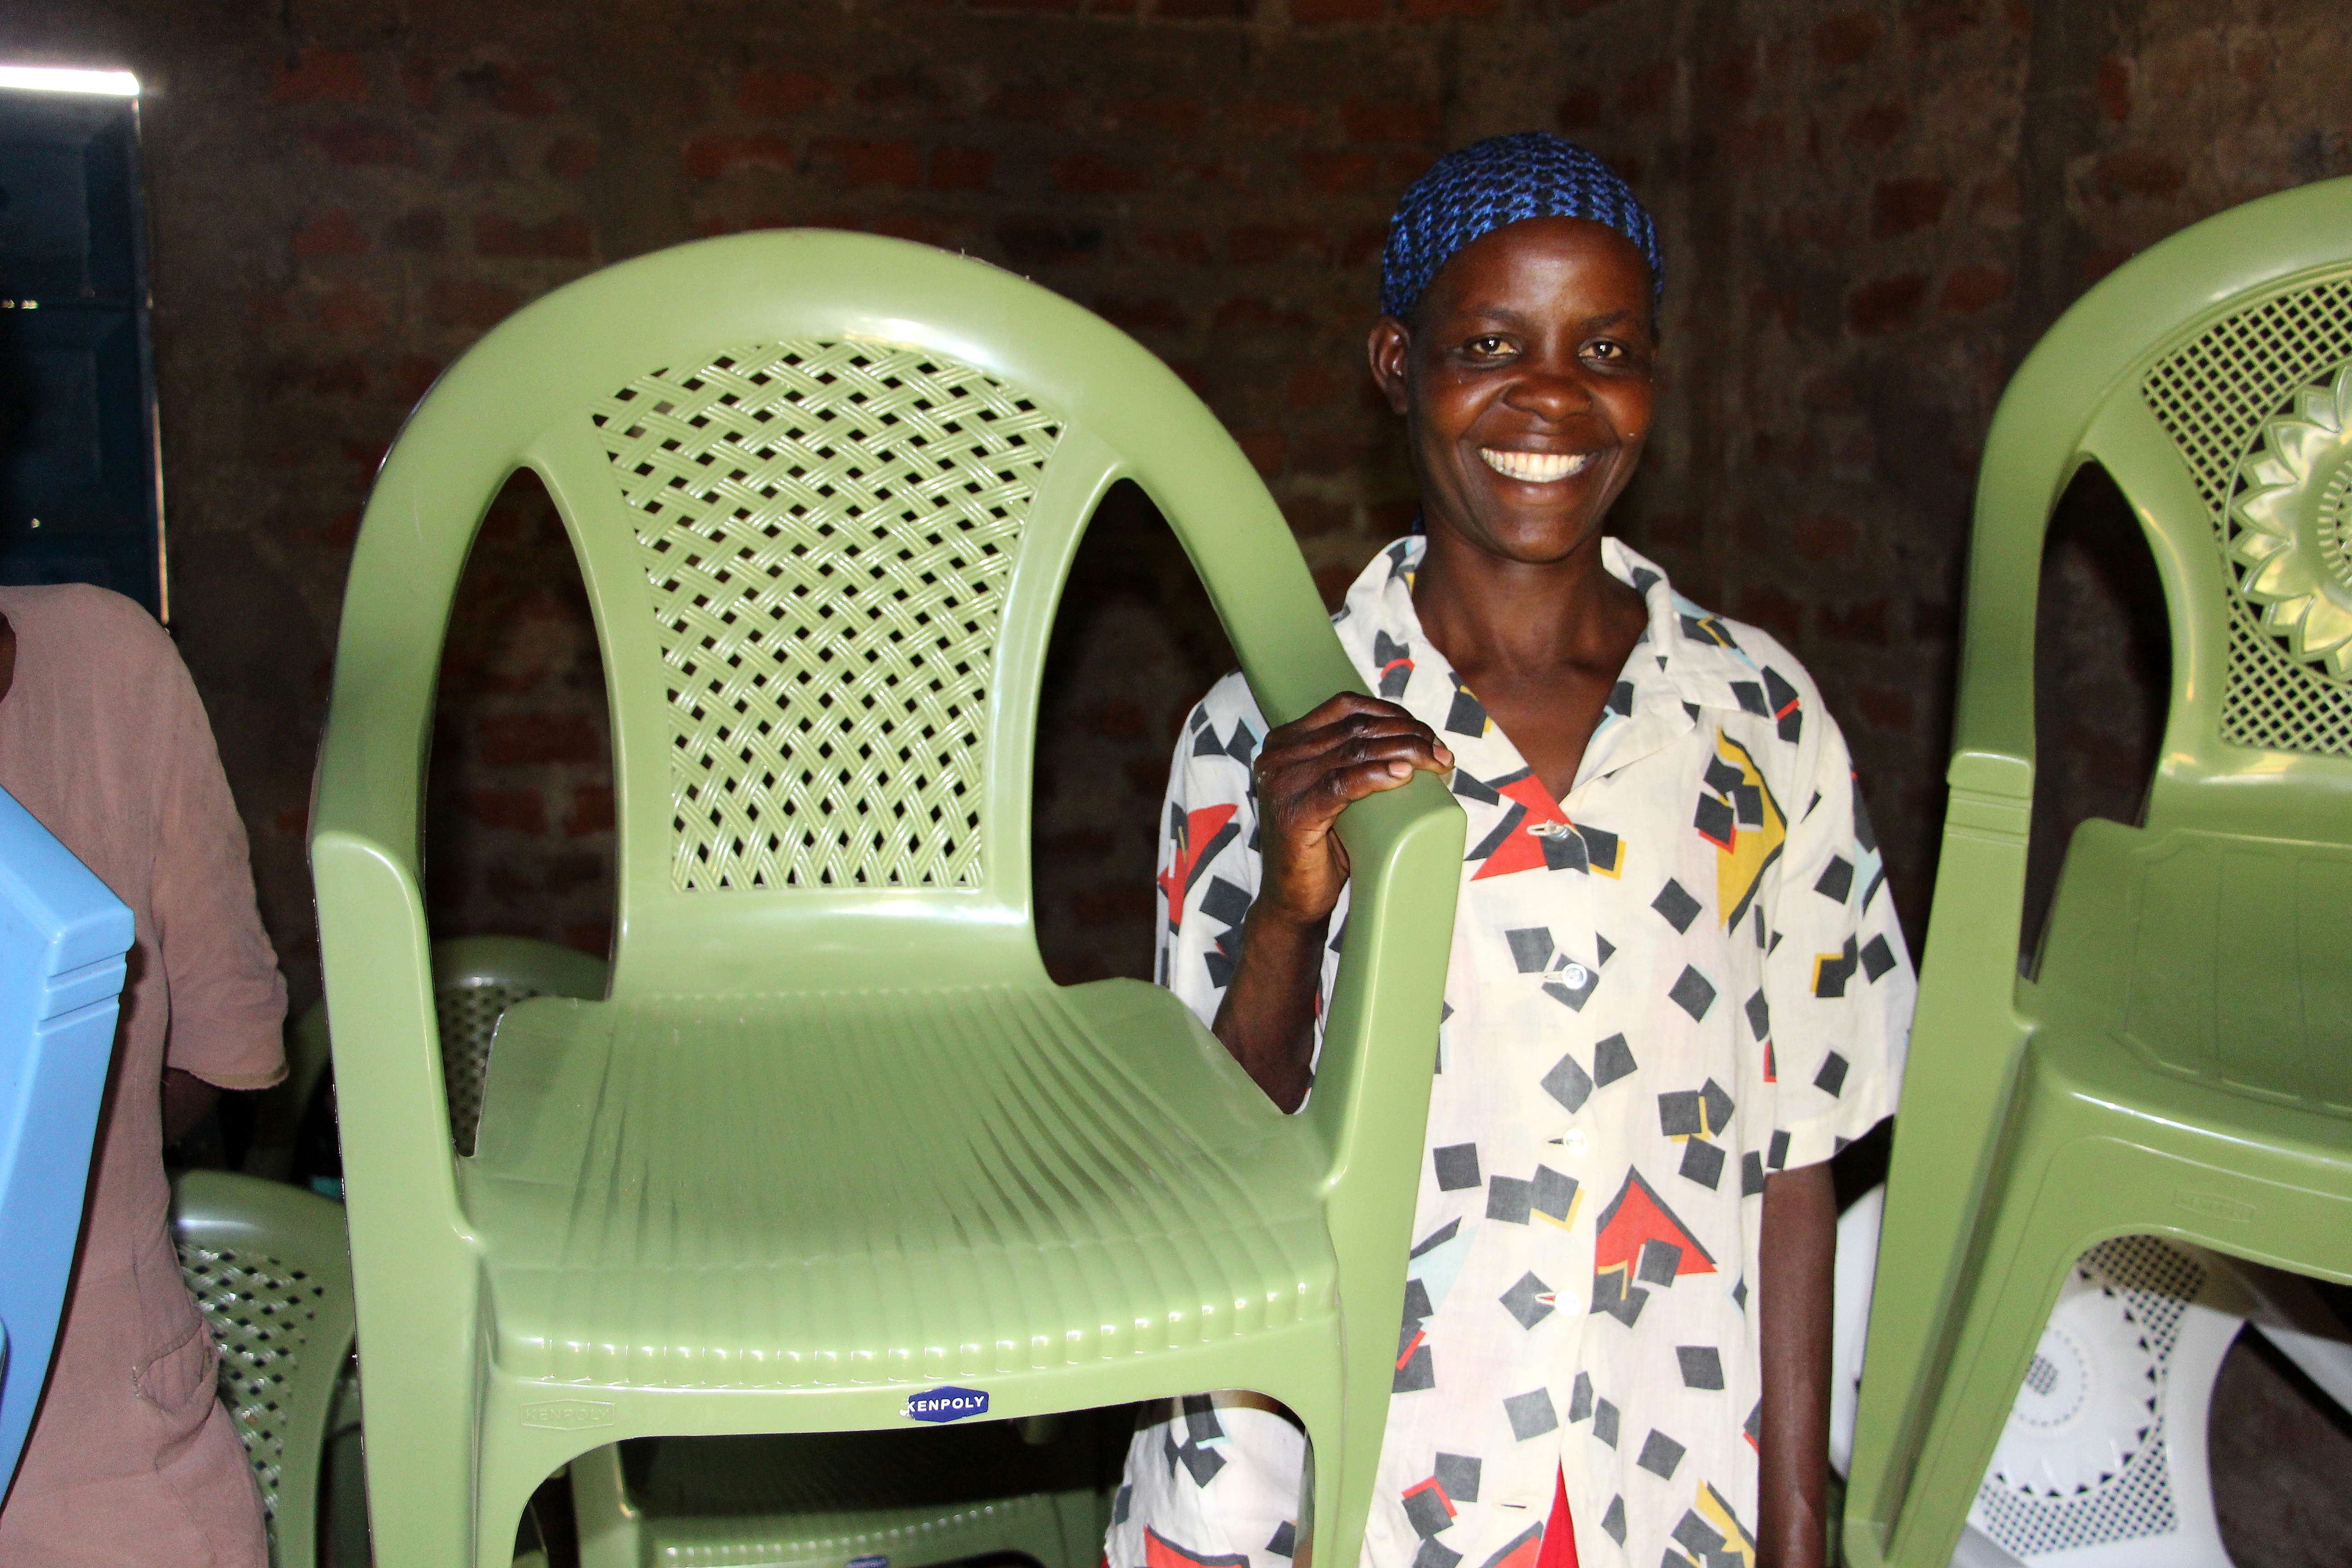 Lydya Nanjala shows off one of the plastic chairs her Village Enterprise business savings group rents out for events